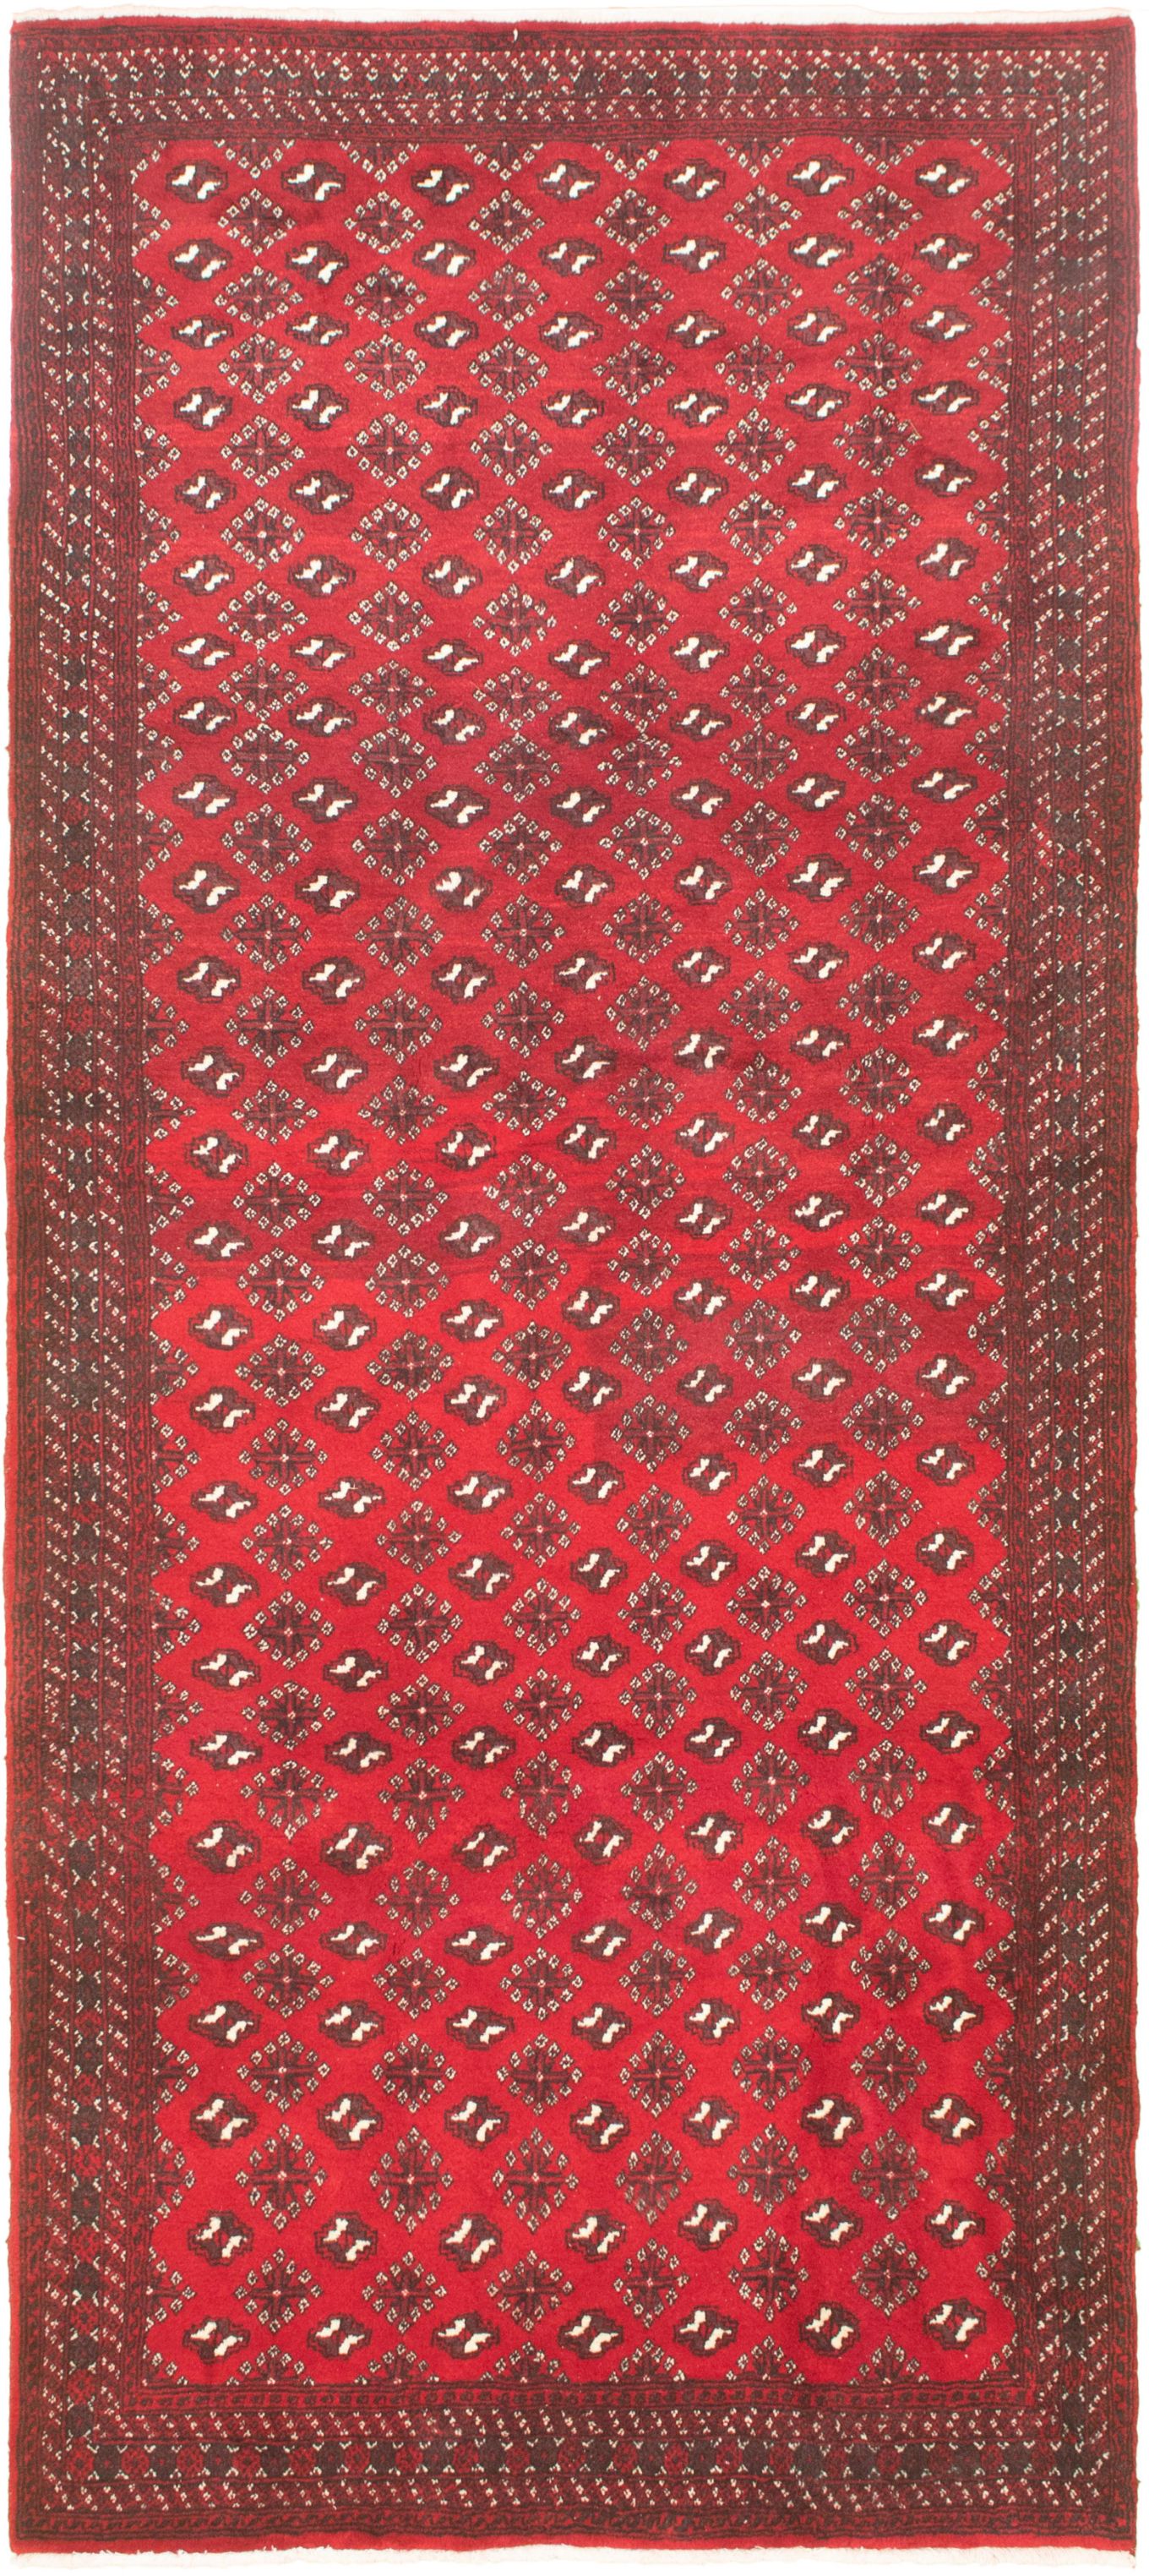 Hand-knotted Shiravan Bokhara Red Wool Rug 4'3" x 10'2" Size: 4'3" x 10'2"  